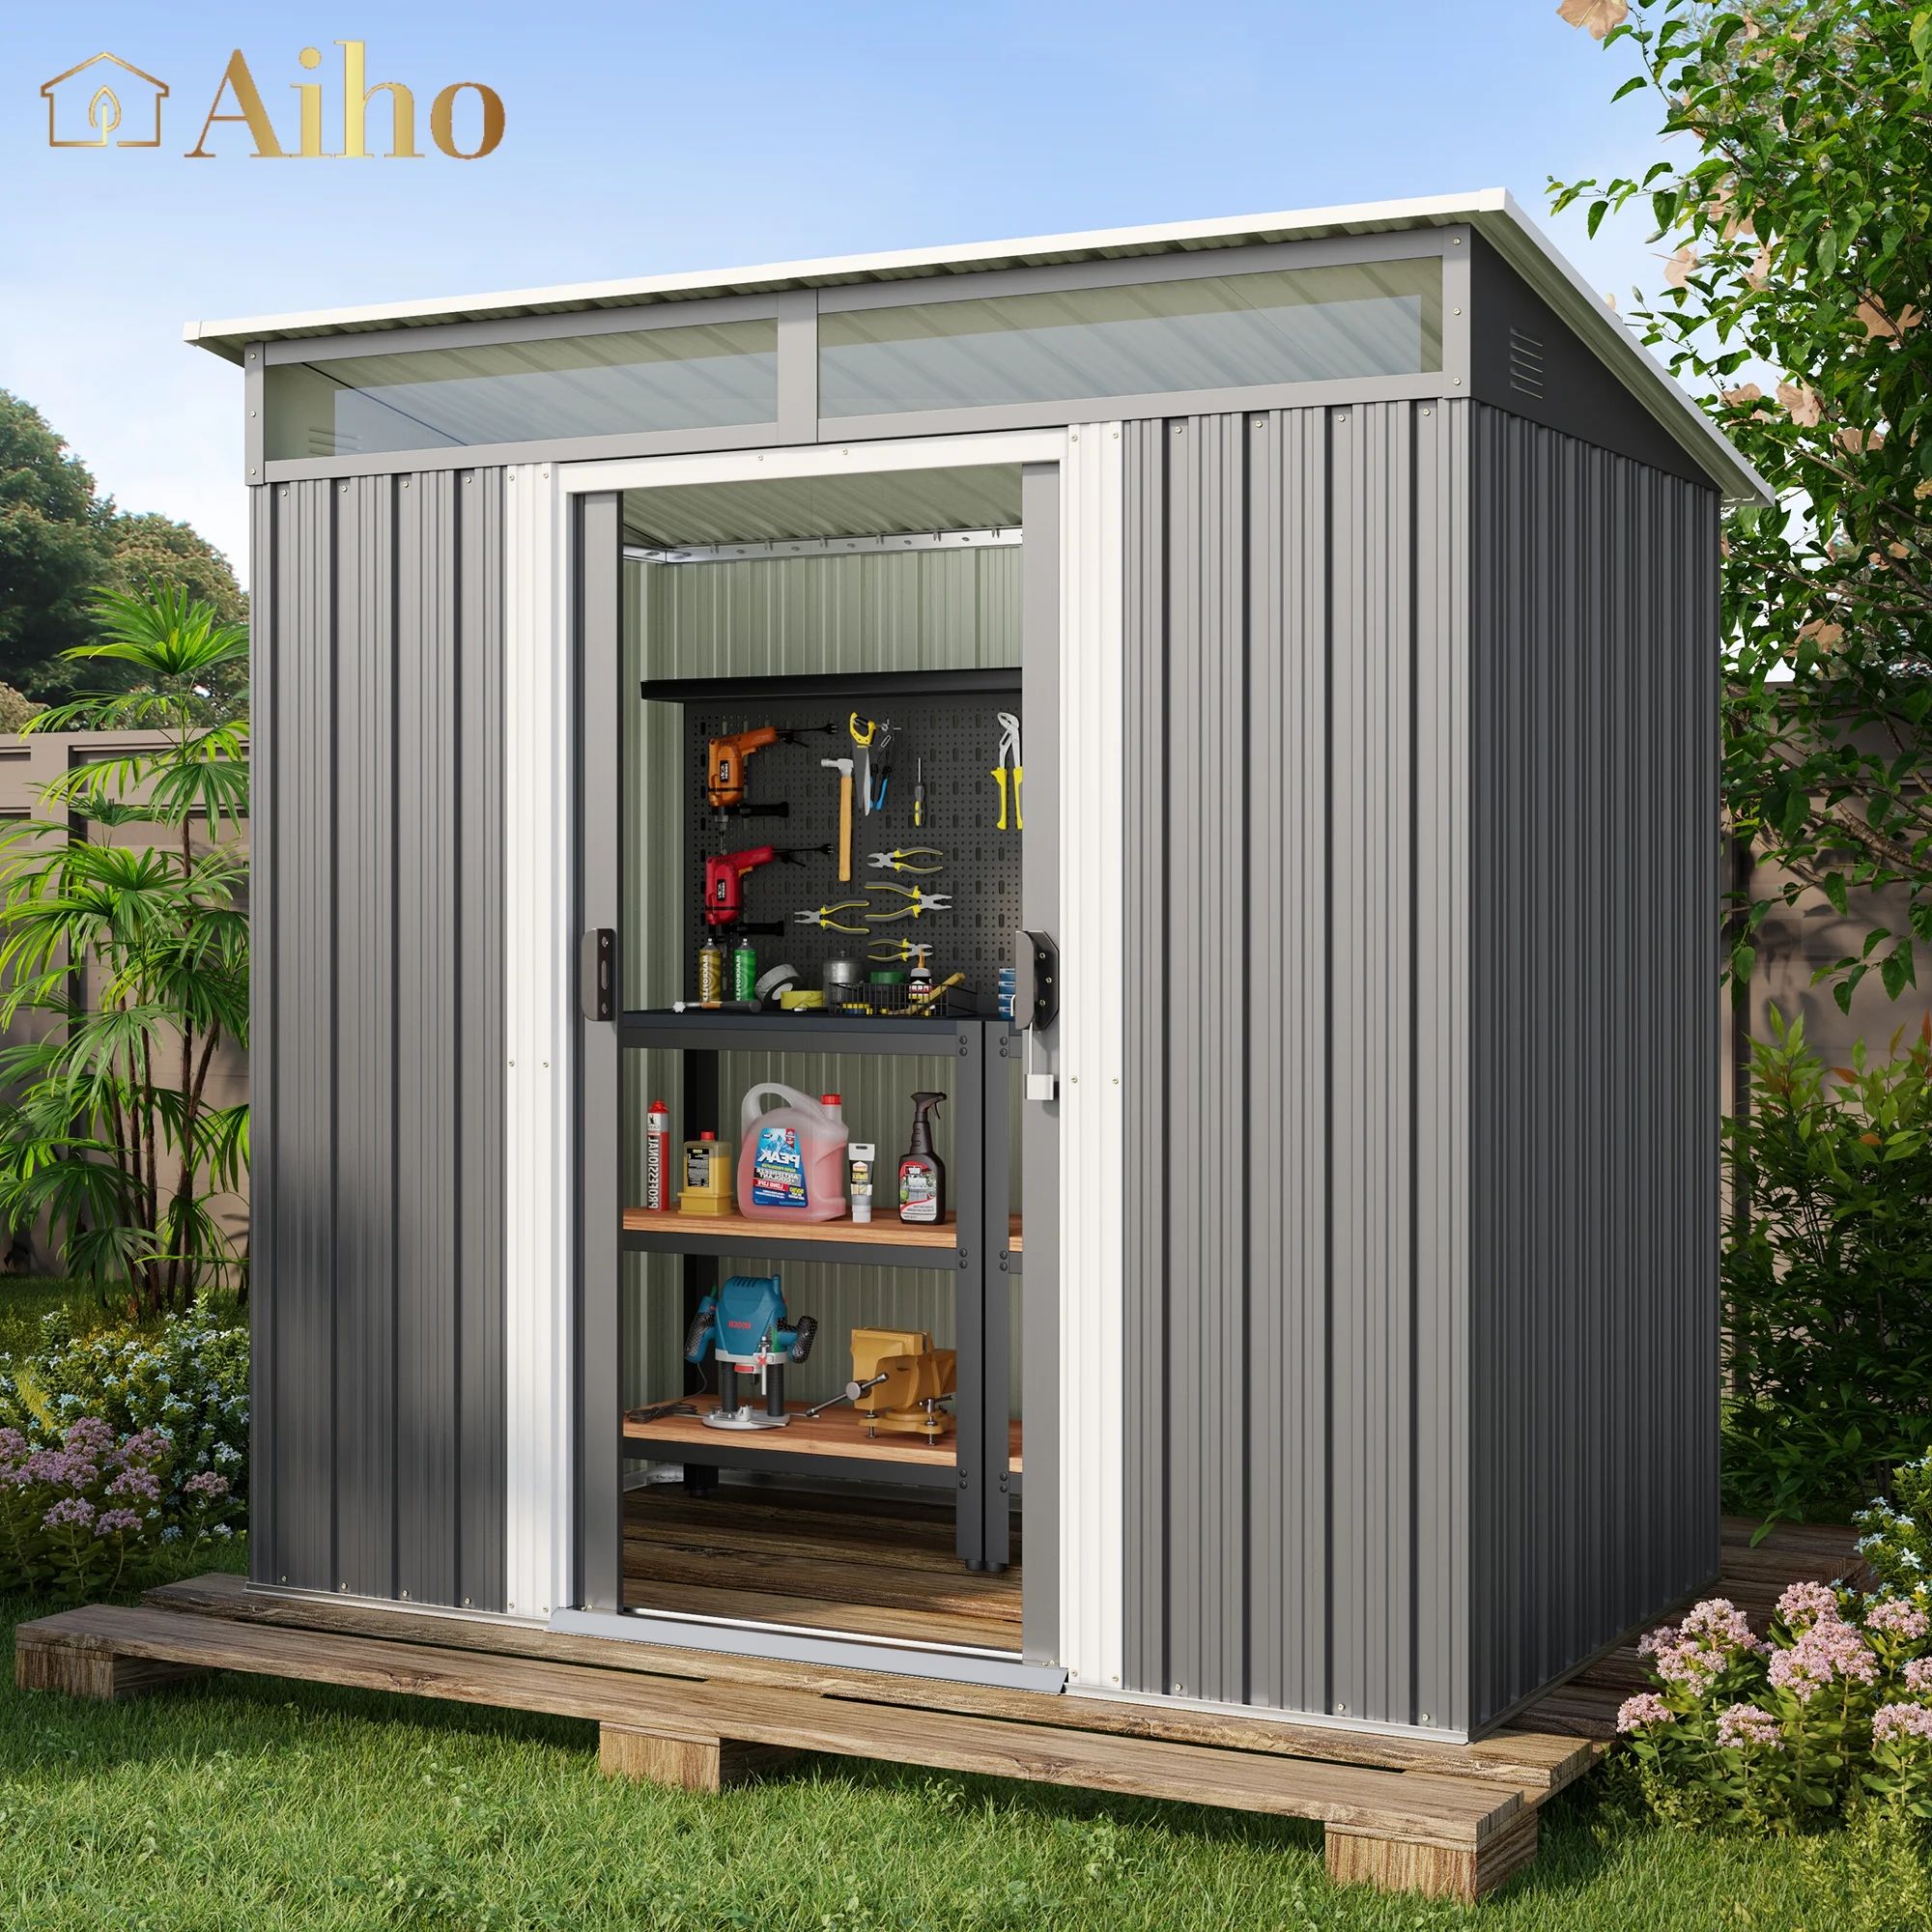 Aiho 6 x 4 FT Outdoor Storage Shed with Sliding Double Doors for Garden, Patio - Gray - Walmart.c... | Walmart (US)